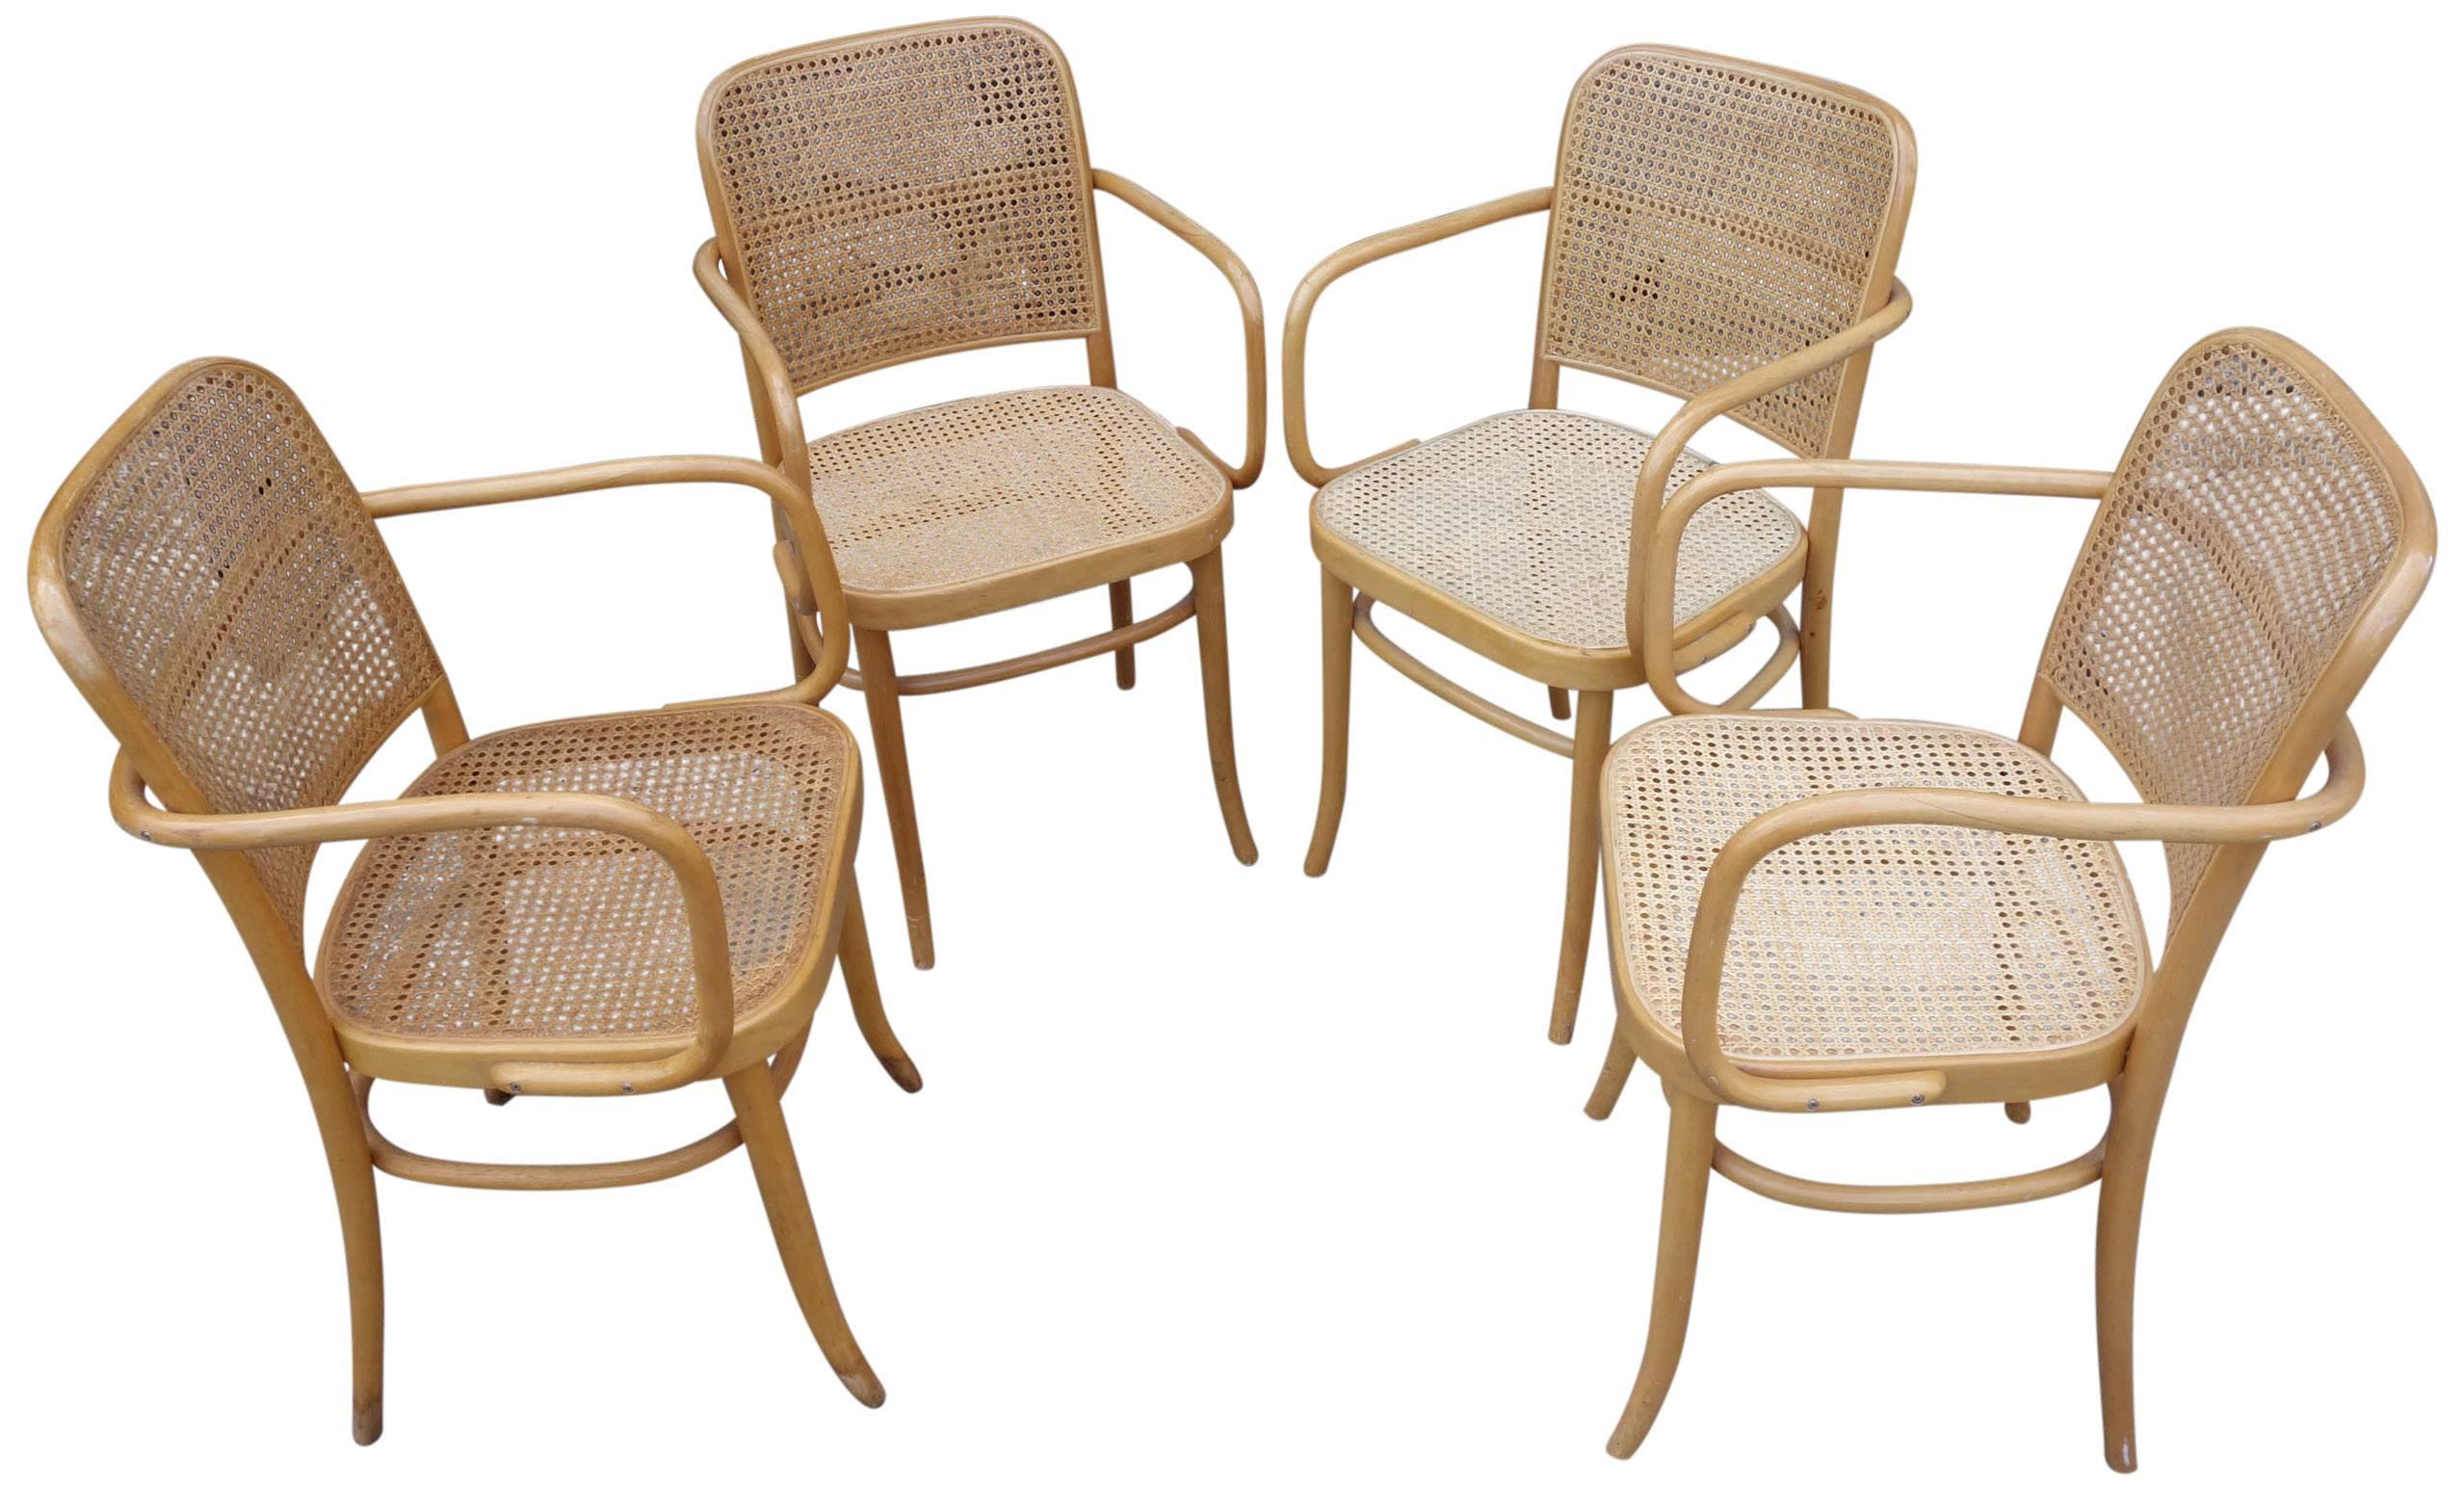 Very nice set of midcentury bentwood and cane chairs designed by Josef Frank and Josef Hoffmann produced by Thonet. Measures: Seat height is 18.25